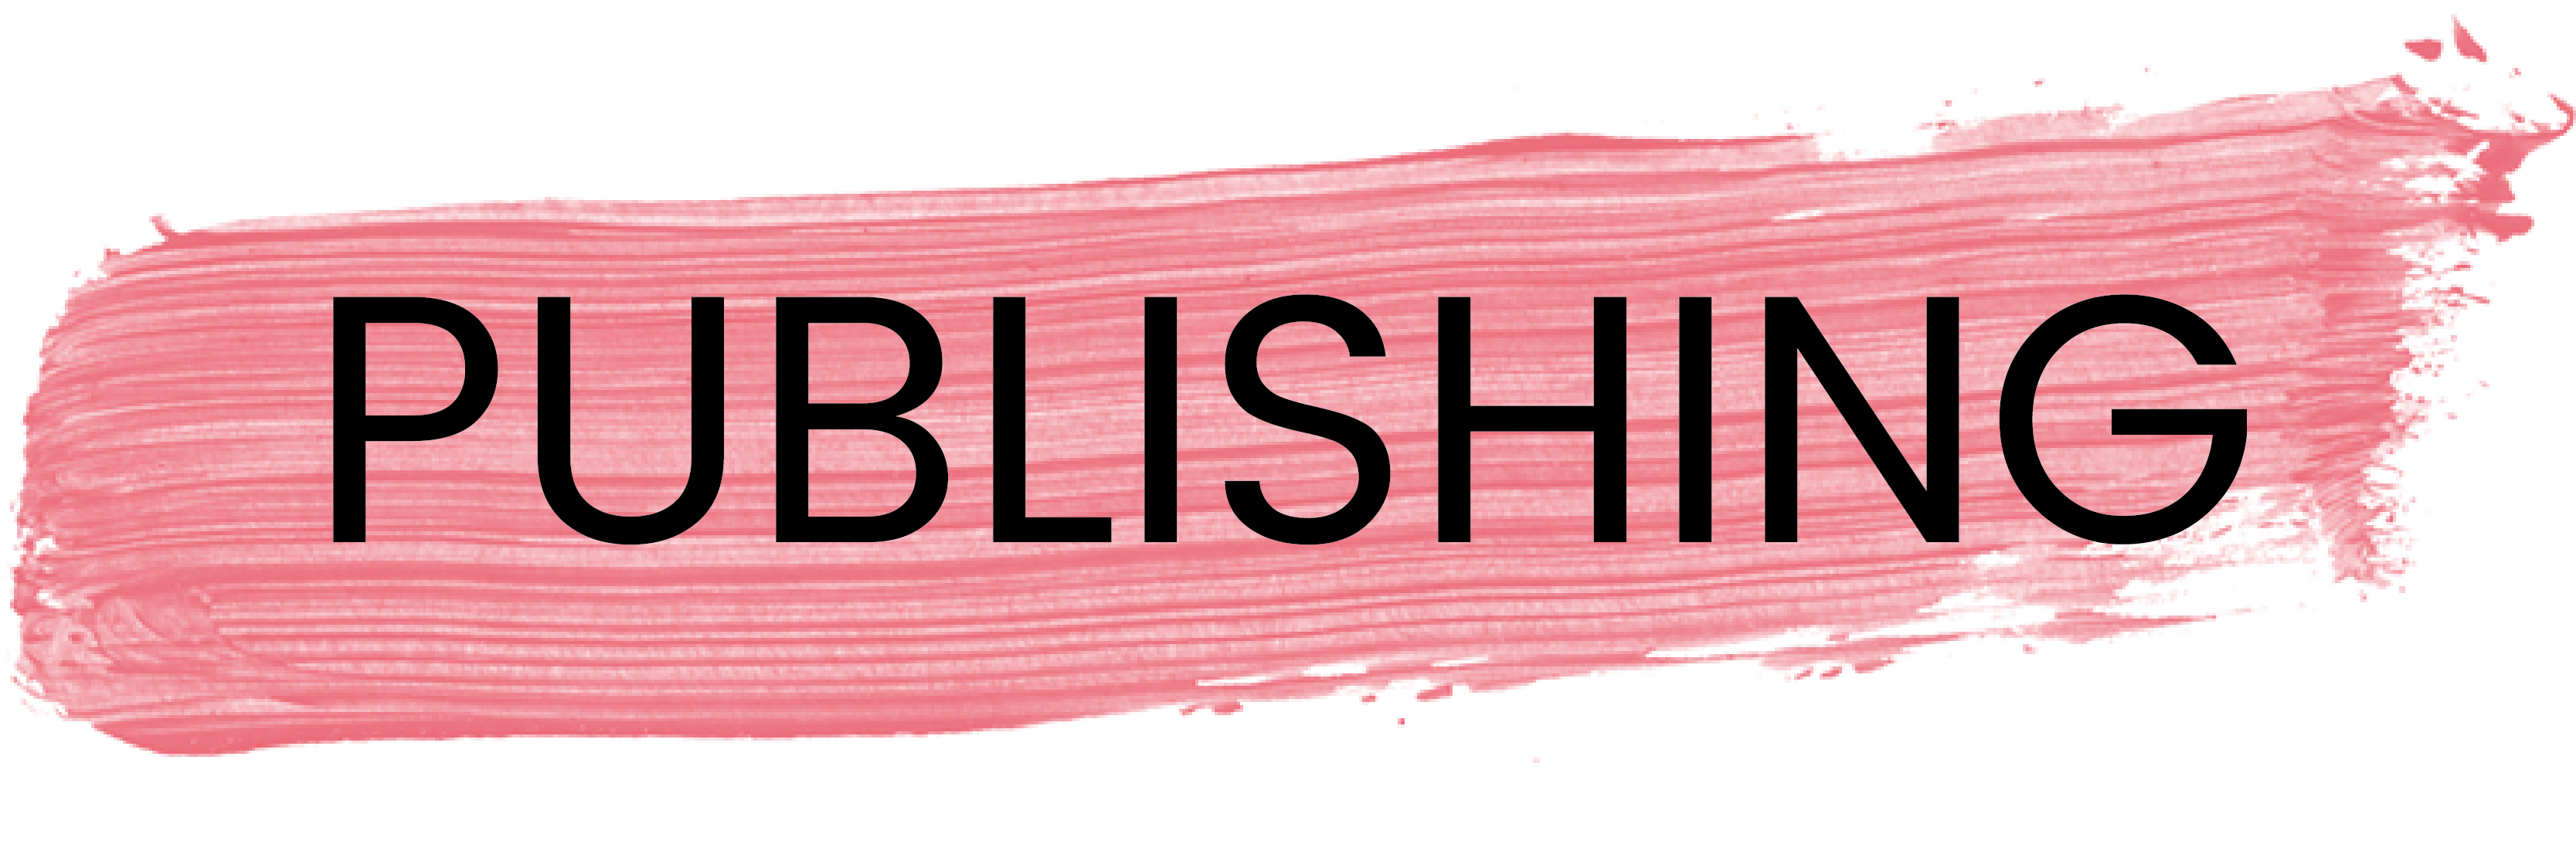 pink-brush-stroke-buttons_publishing